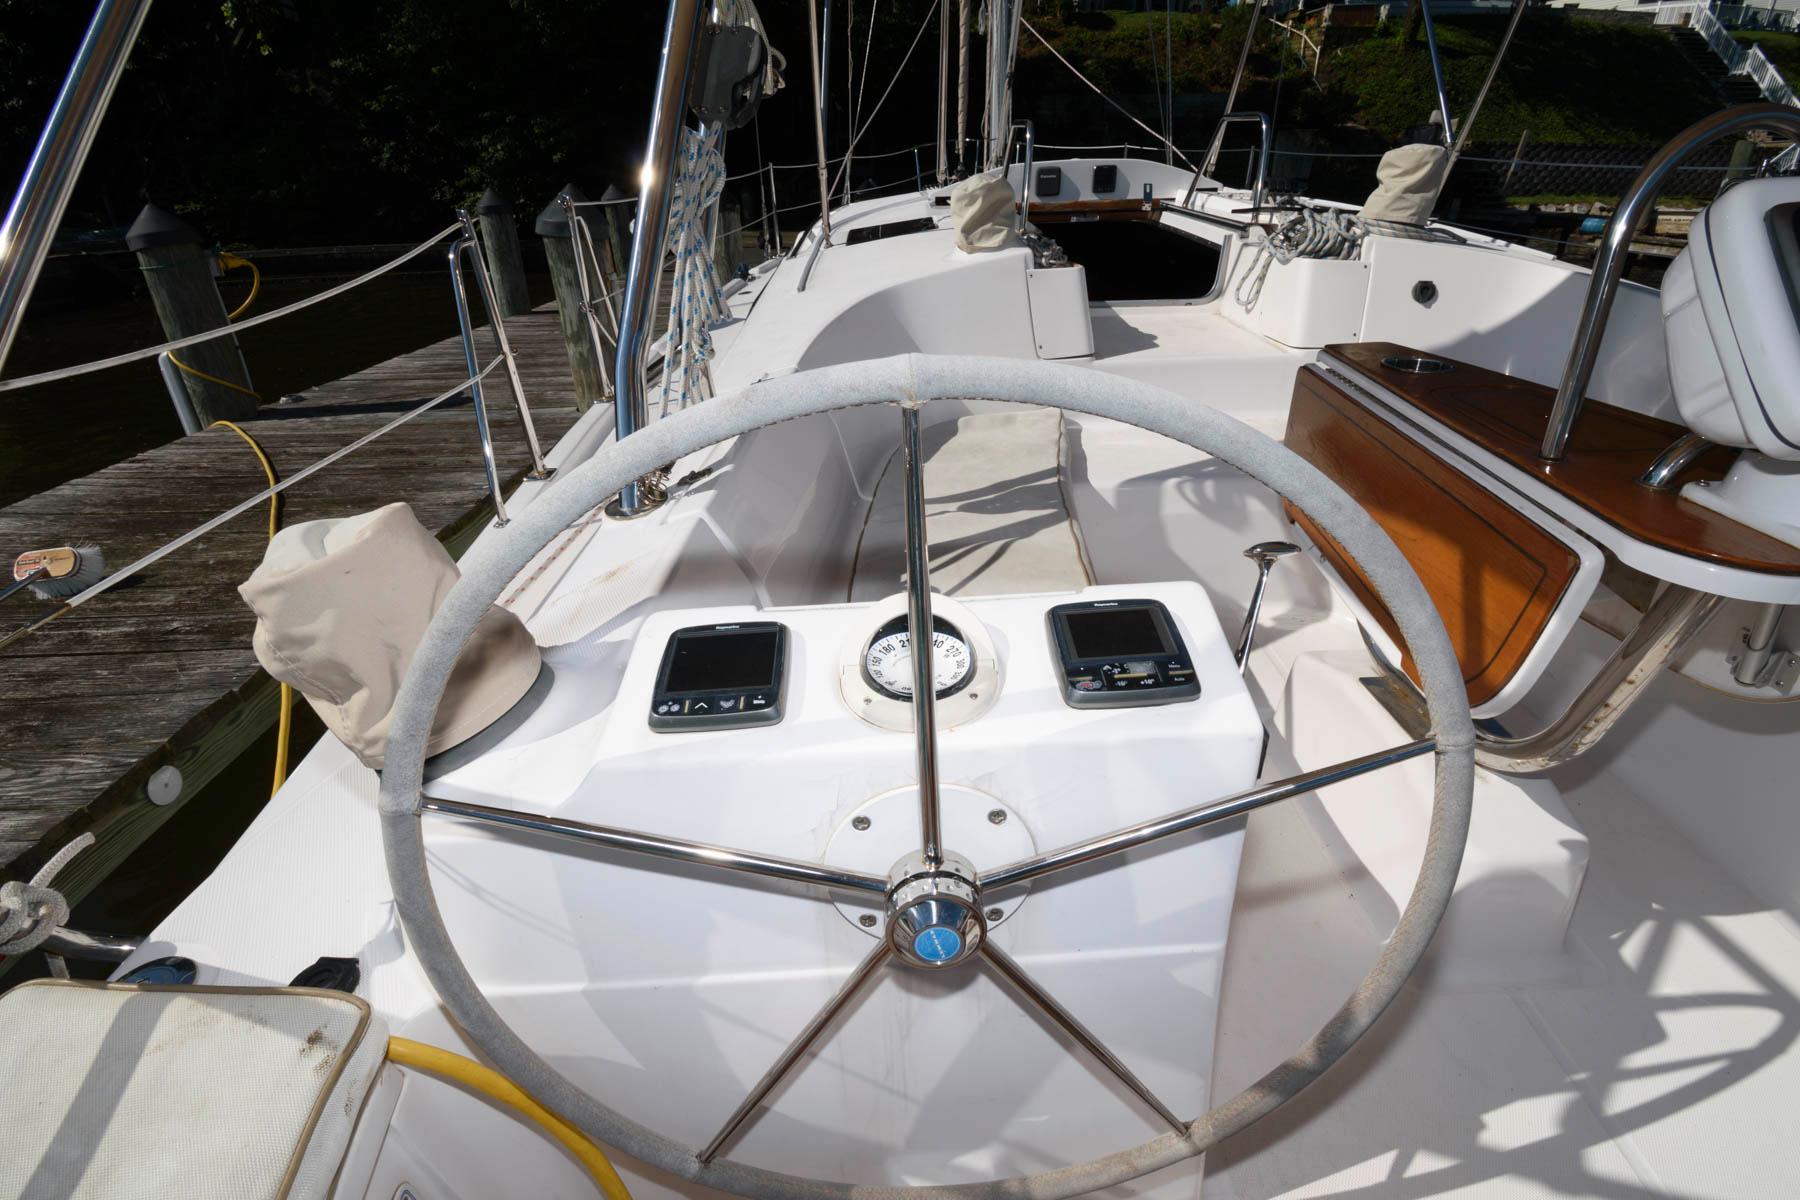 M 6209 SK Knot 10 Yacht Sales